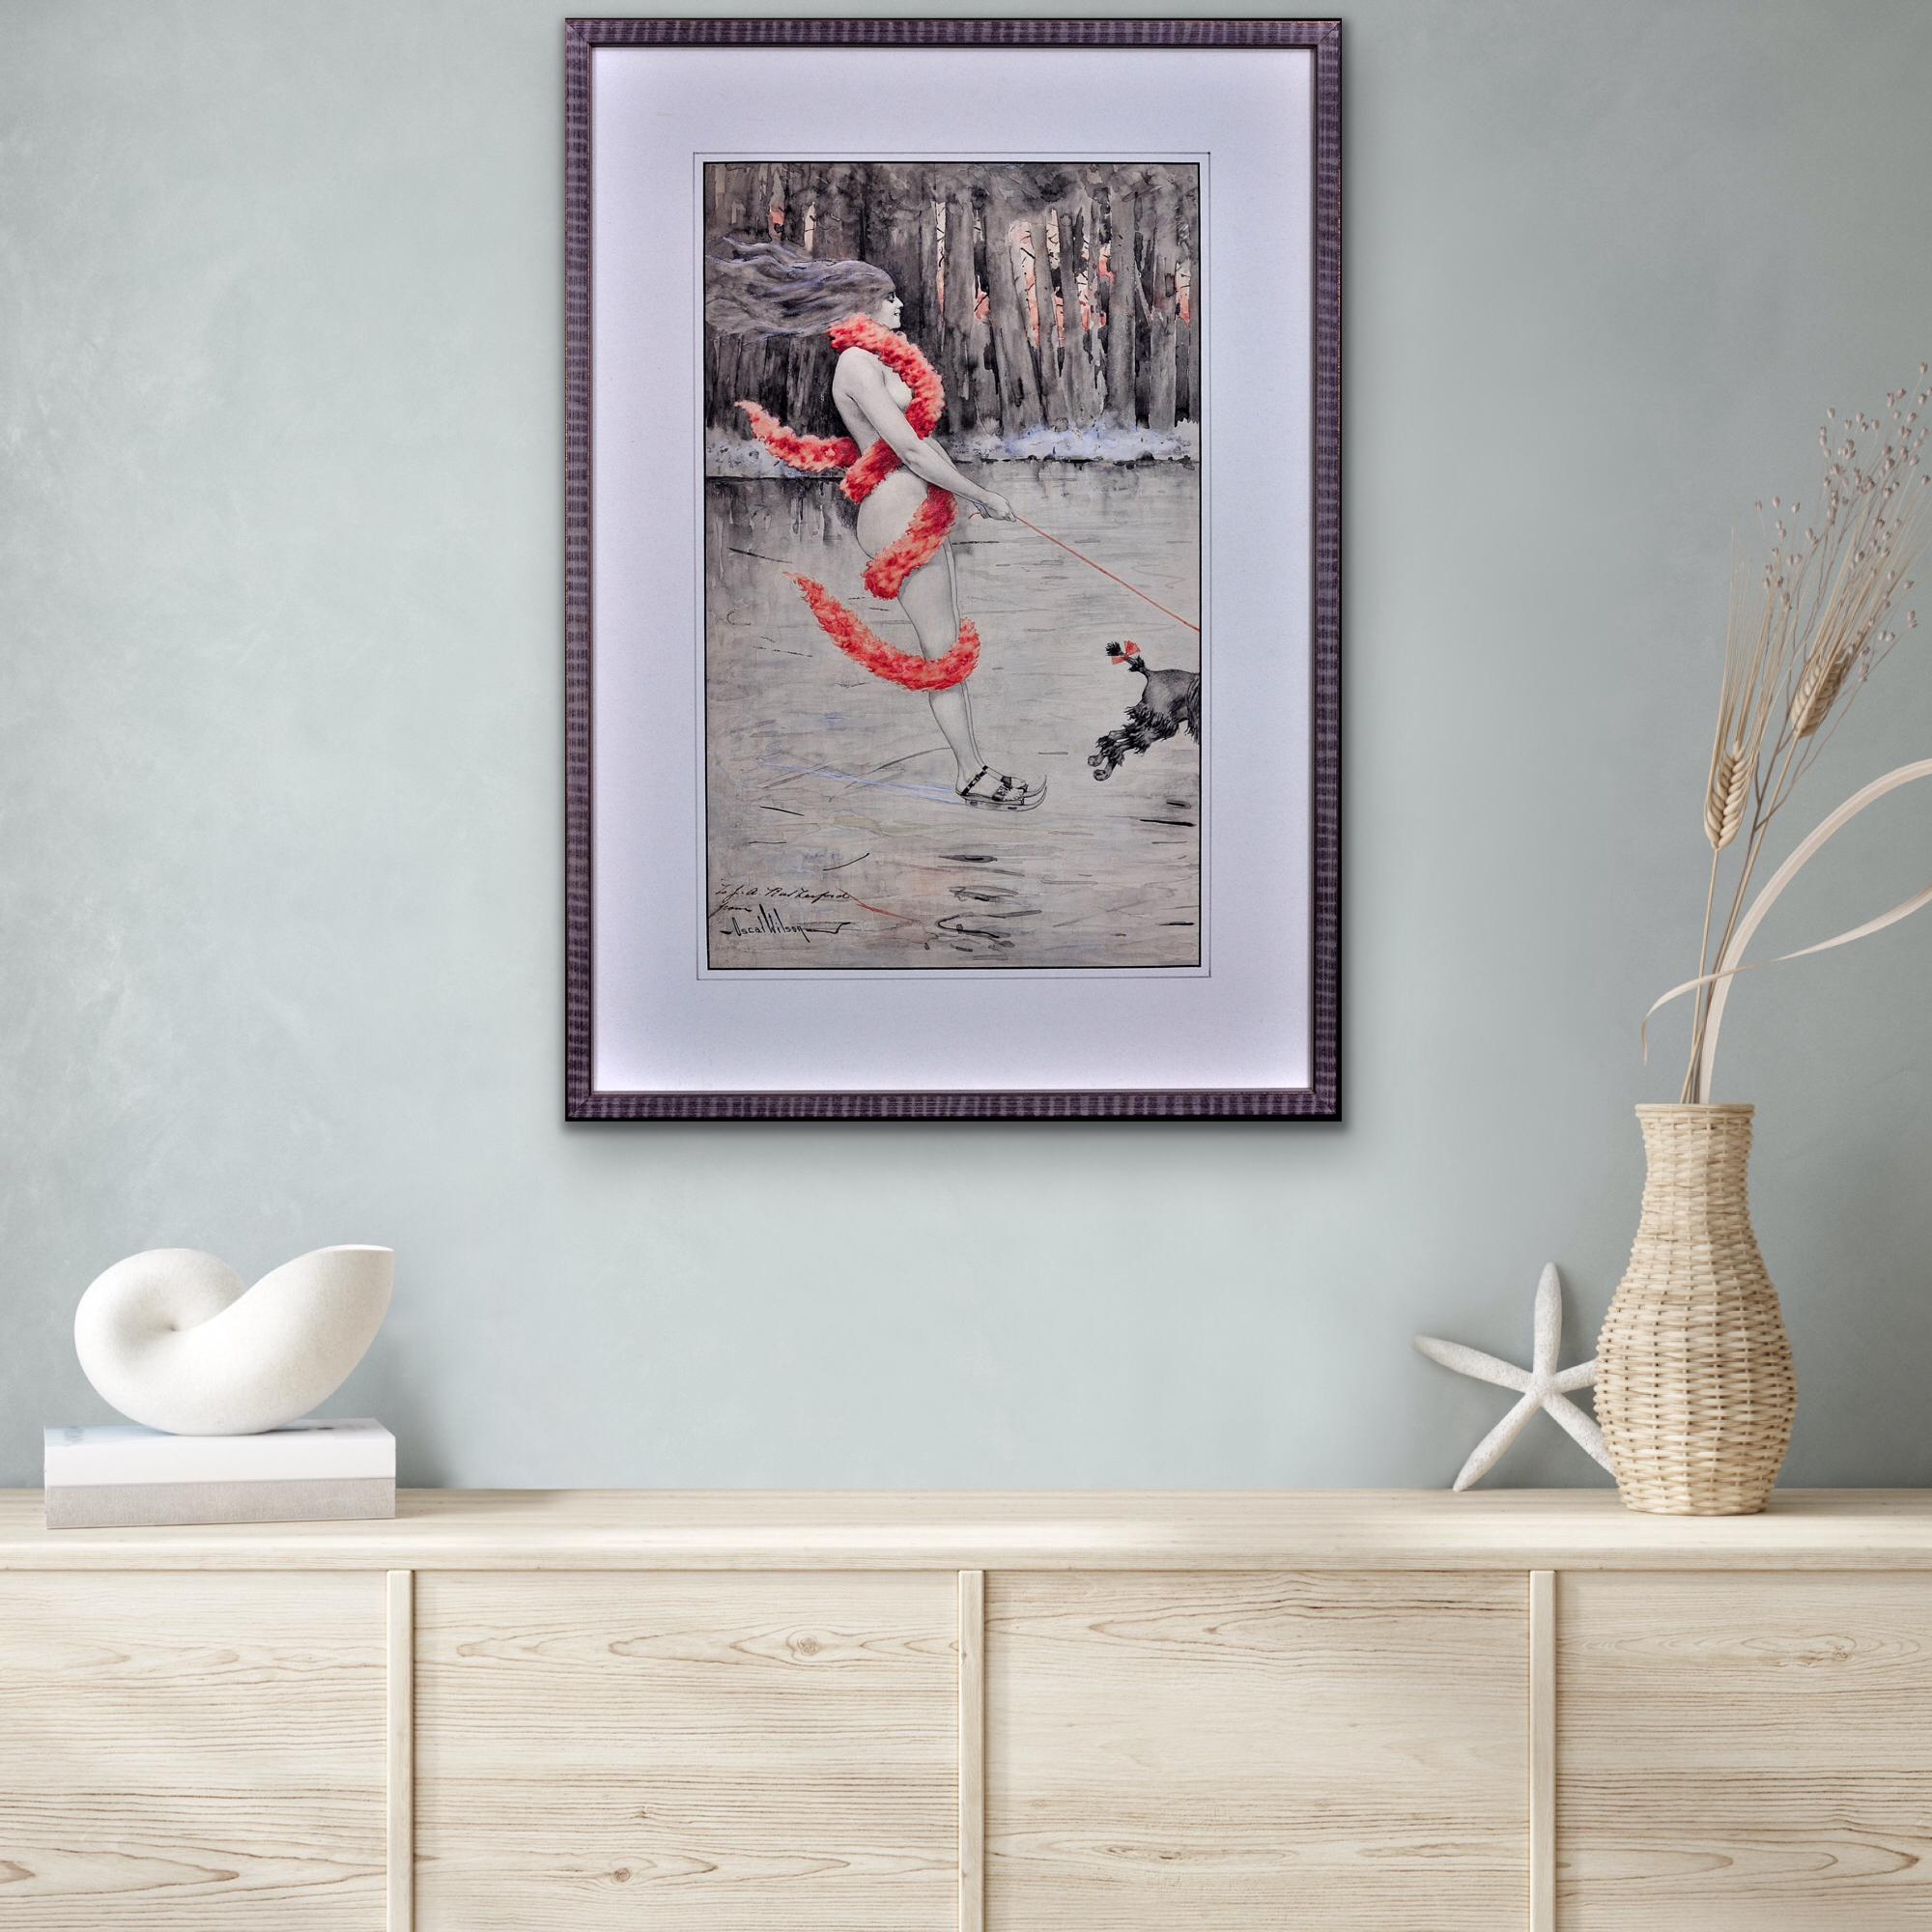 The Lady of the Lake.Naked Lady with Red Boa Skating Poodle Art Nouveau Such Fun For Sale 14